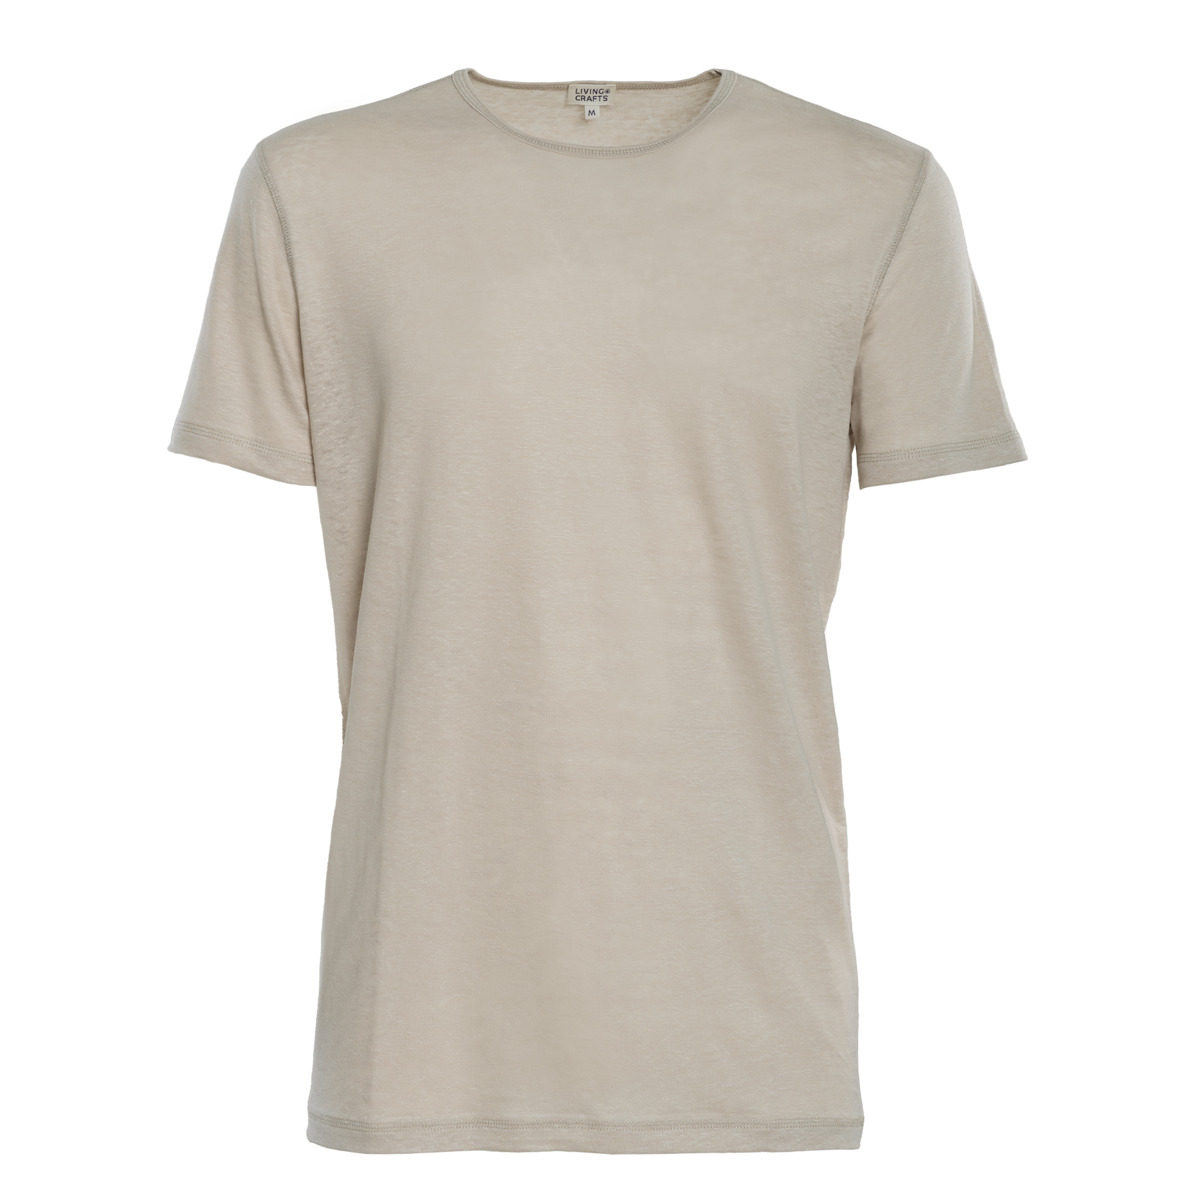 Beige T-Shirt, ANDY